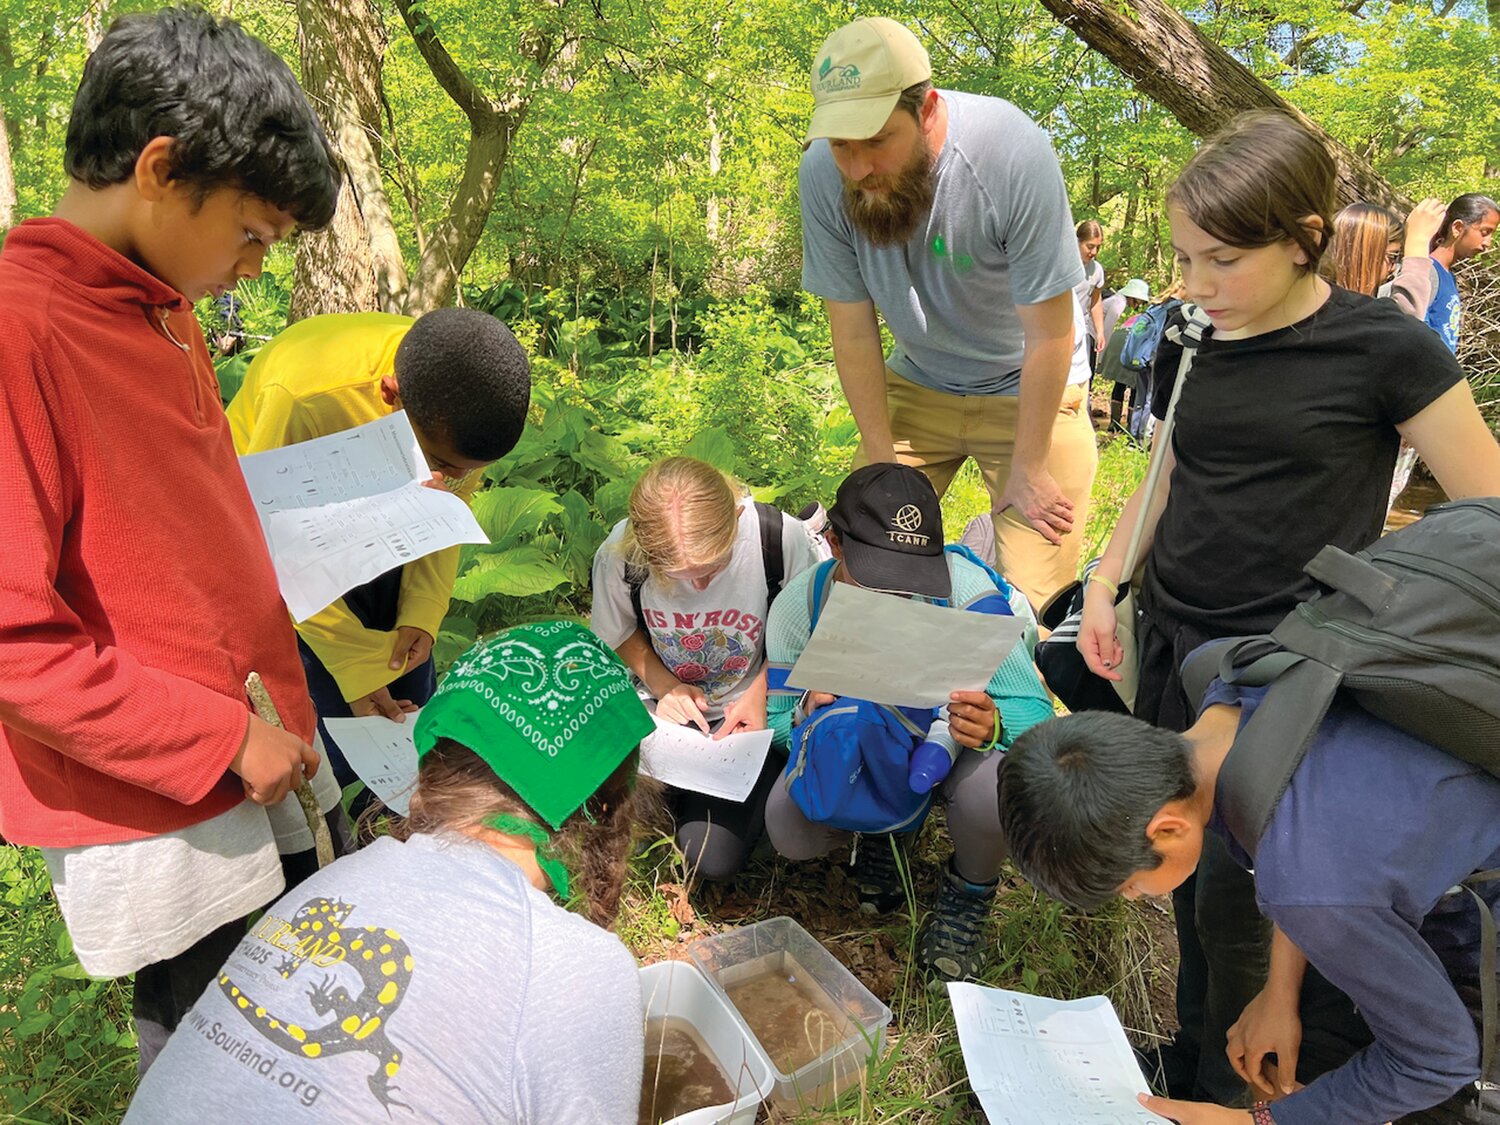 Princeton Montessori middle school students learn about macroinvertebrates and stream health with Sourland Conservancy staff.